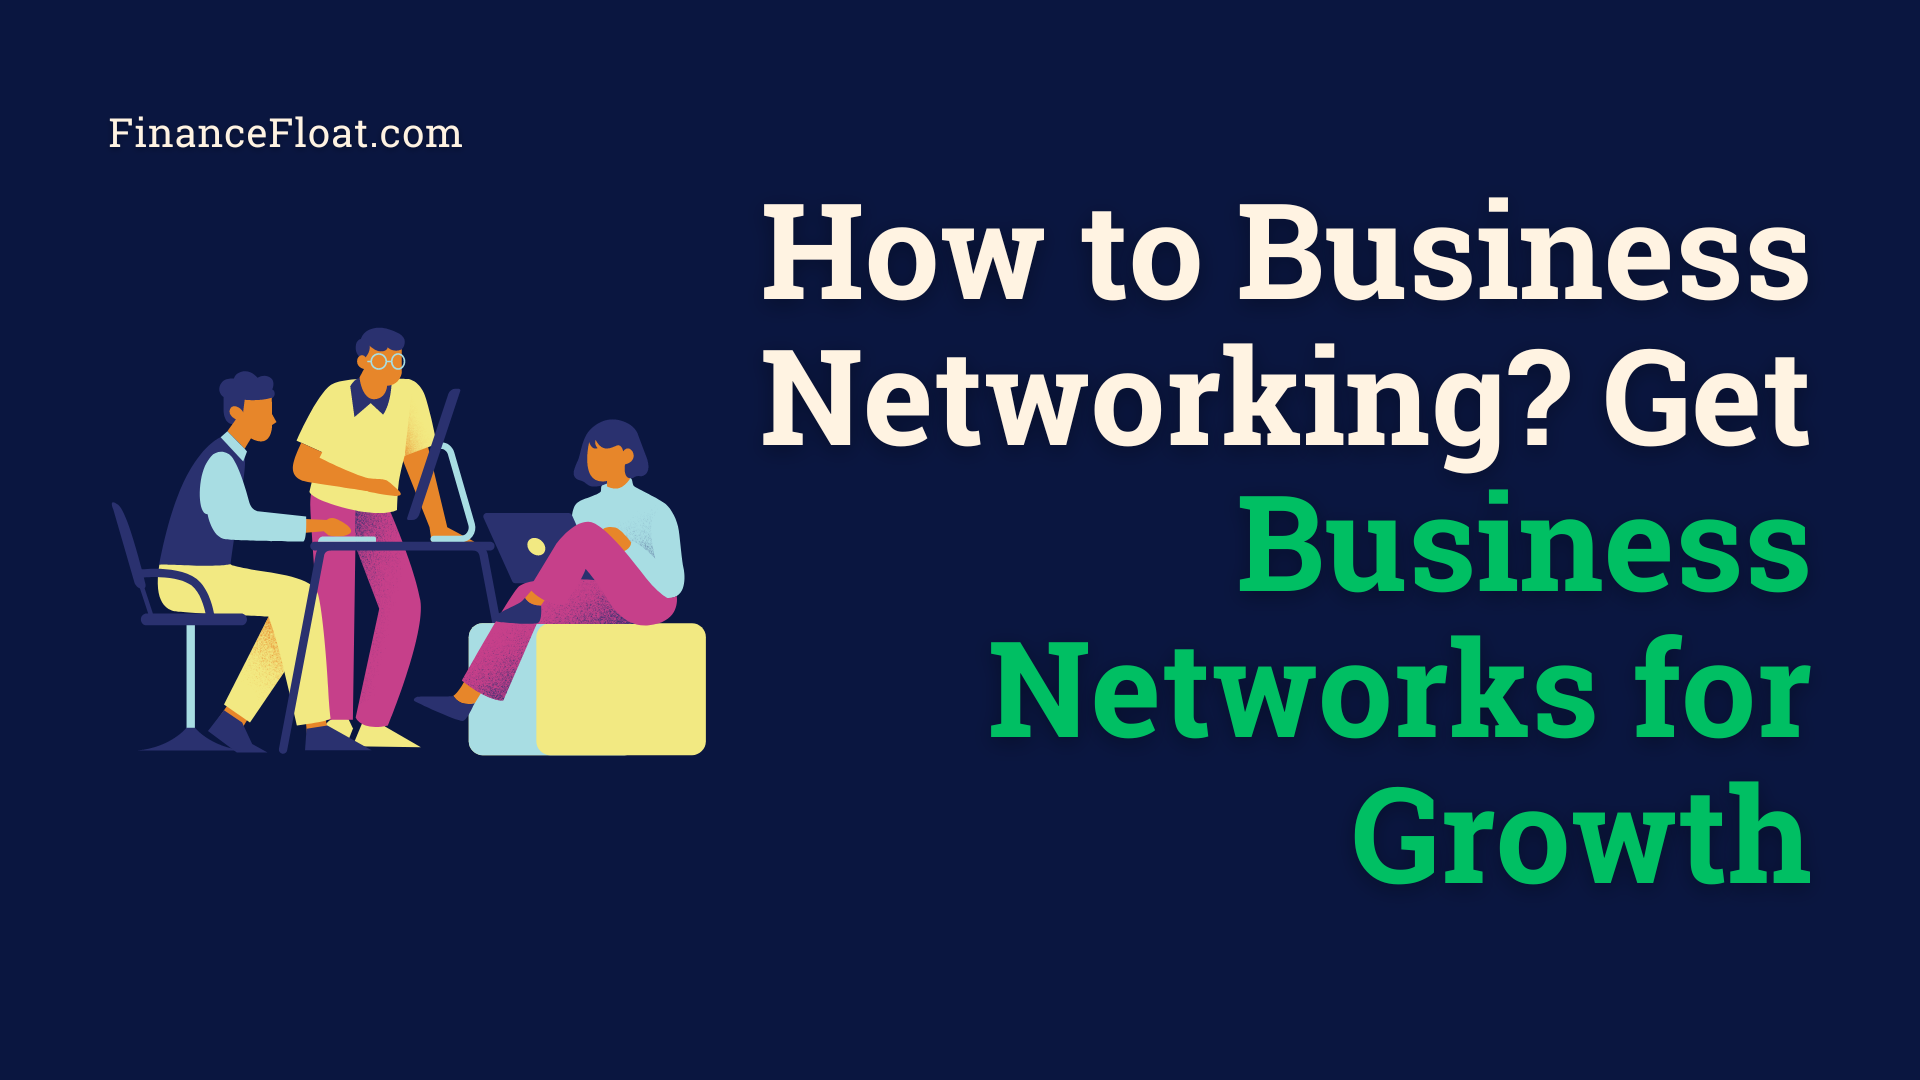 How to Business Networking Get Business Networks for Growth